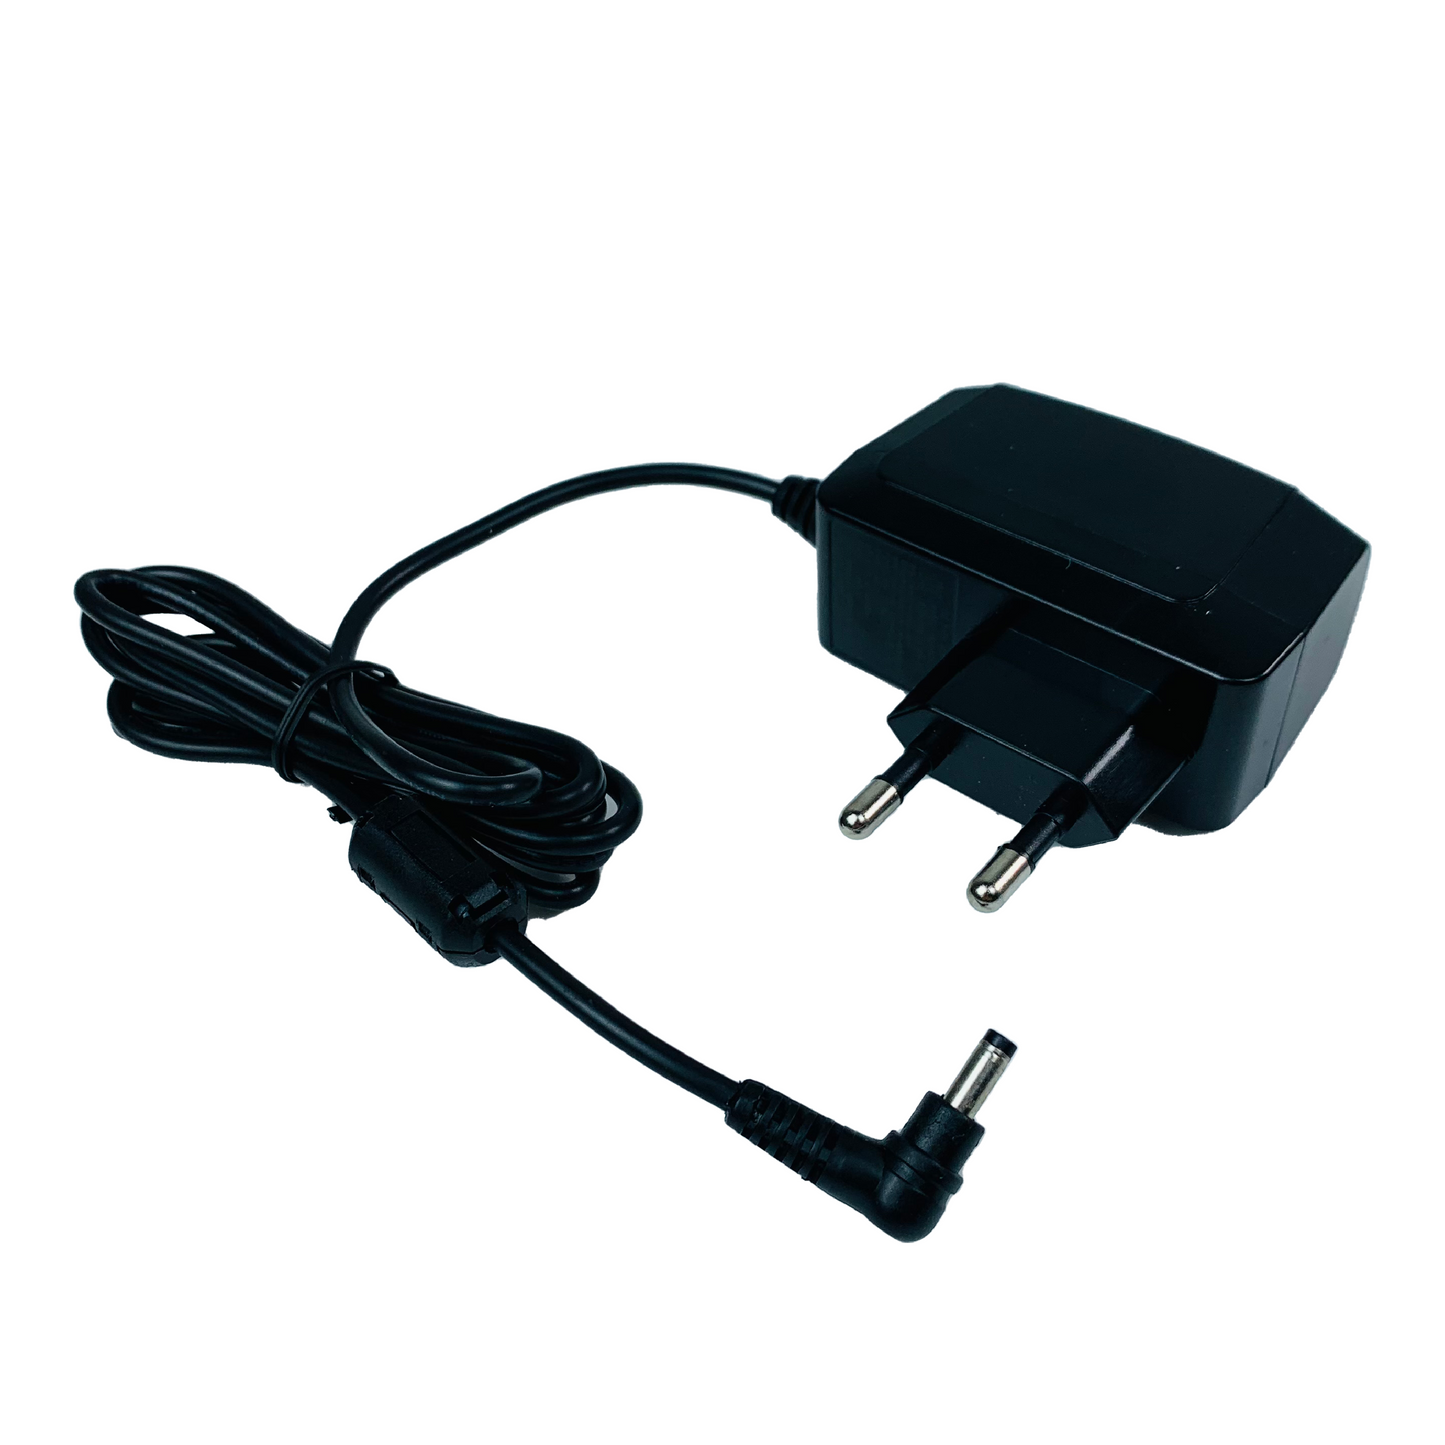 DC05V Adapter | Adapter for aD-H14, aD-H12 only KOREAN